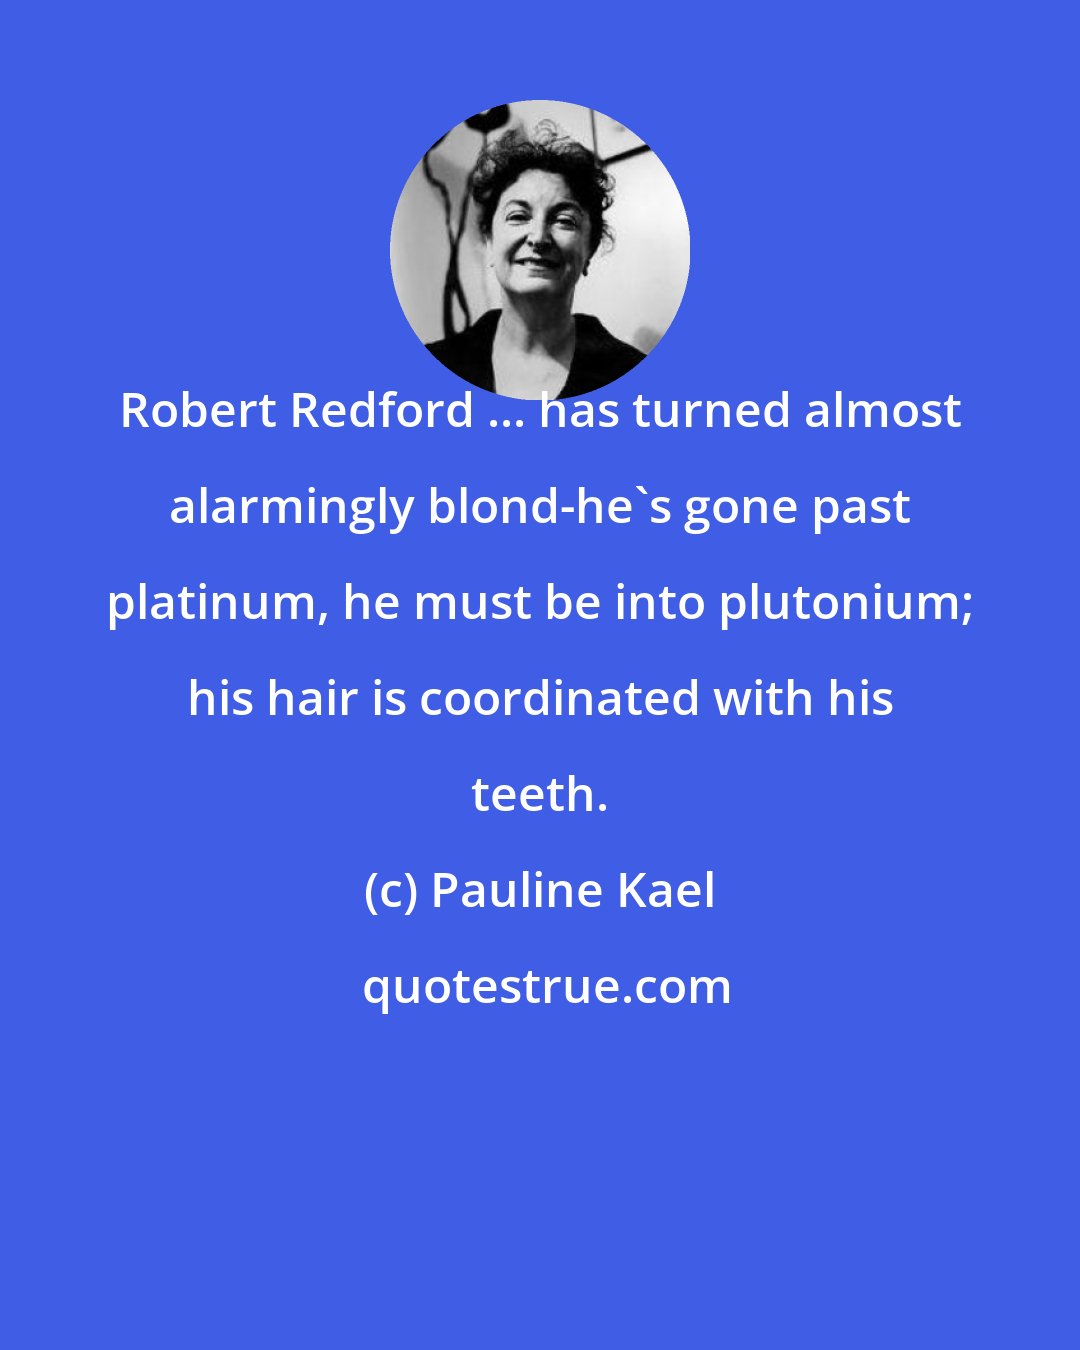 Pauline Kael: Robert Redford ... has turned almost alarmingly blond-he's gone past platinum, he must be into plutonium; his hair is coordinated with his teeth.